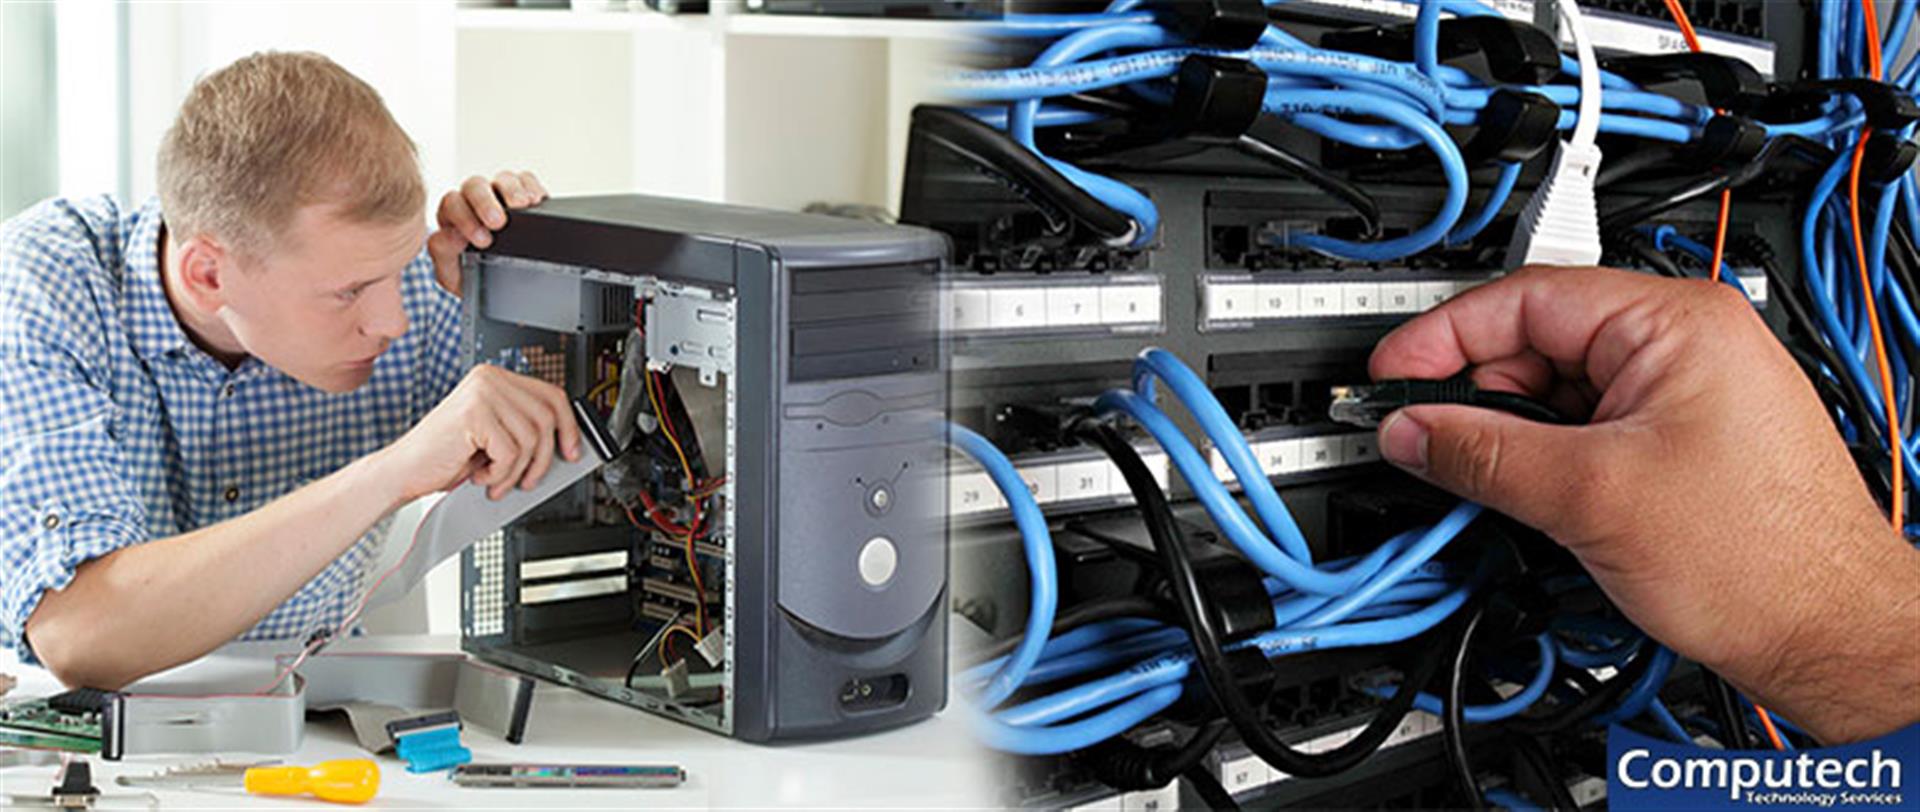 Somerville Tennessee On-Site Computer PC and Printer Repairs, Network, Voice & Data Cabling Services